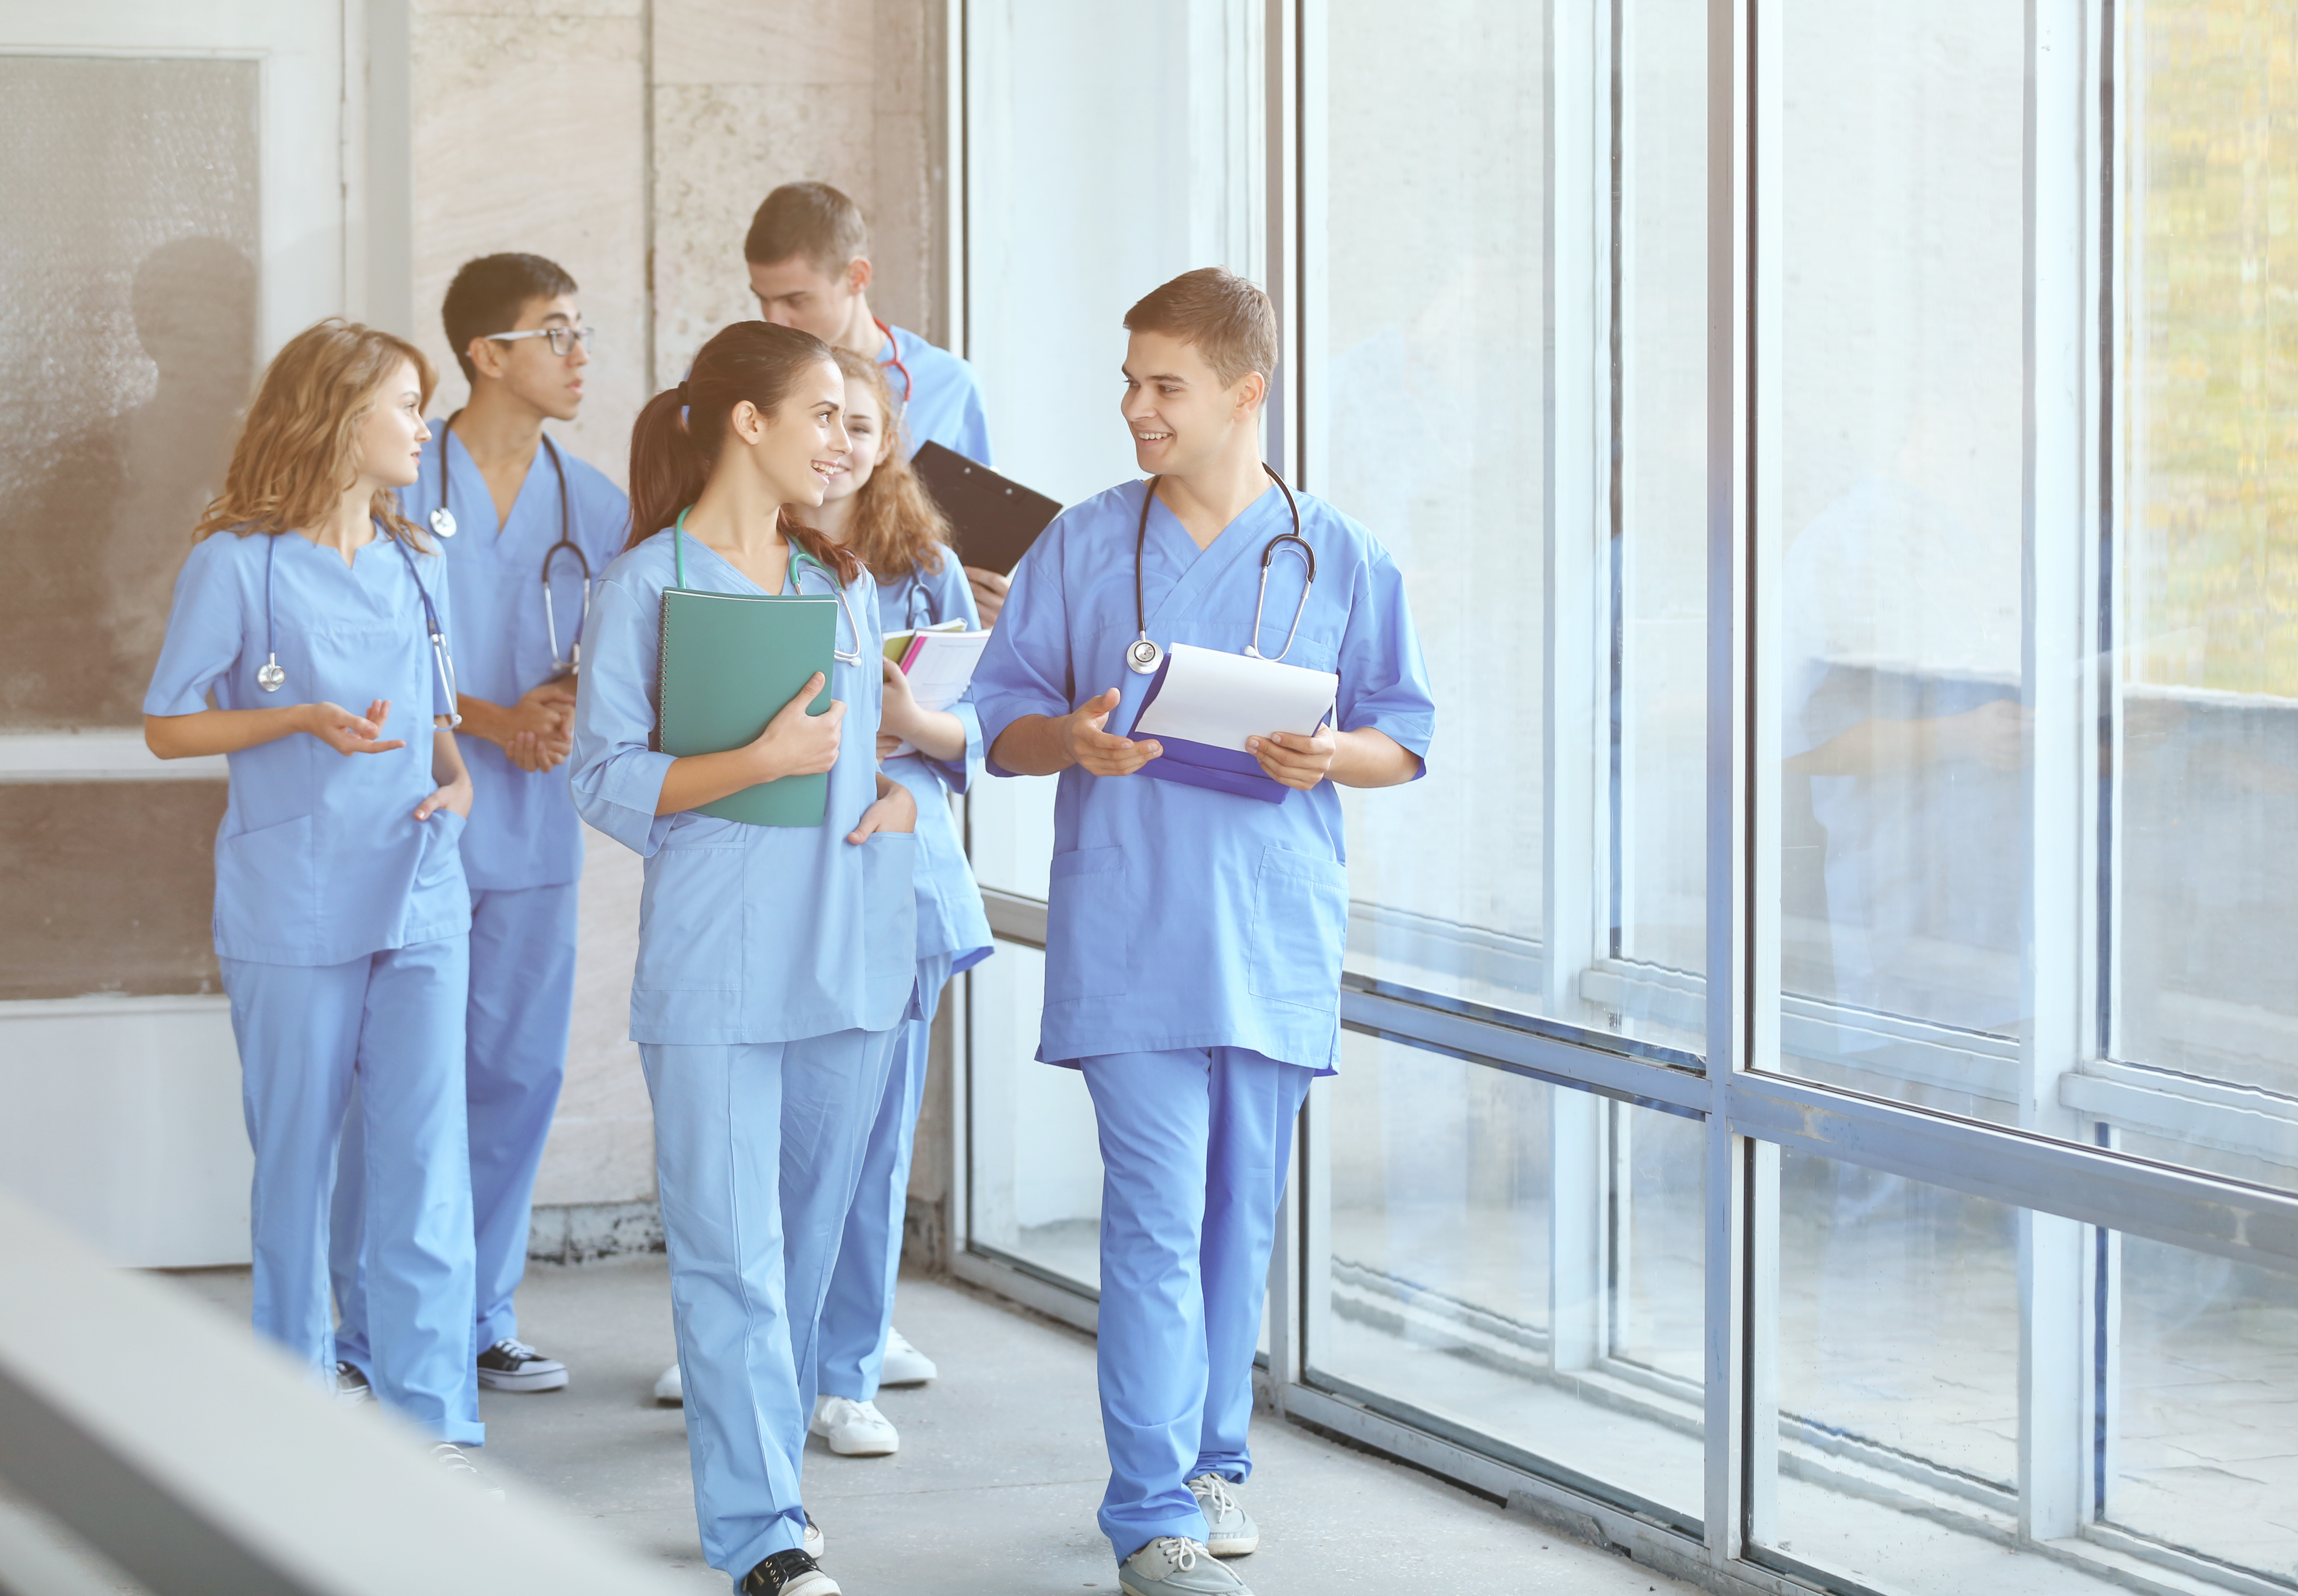 Lippincott® Solutions: Supporting nurse educators to develop practice-ready new grads